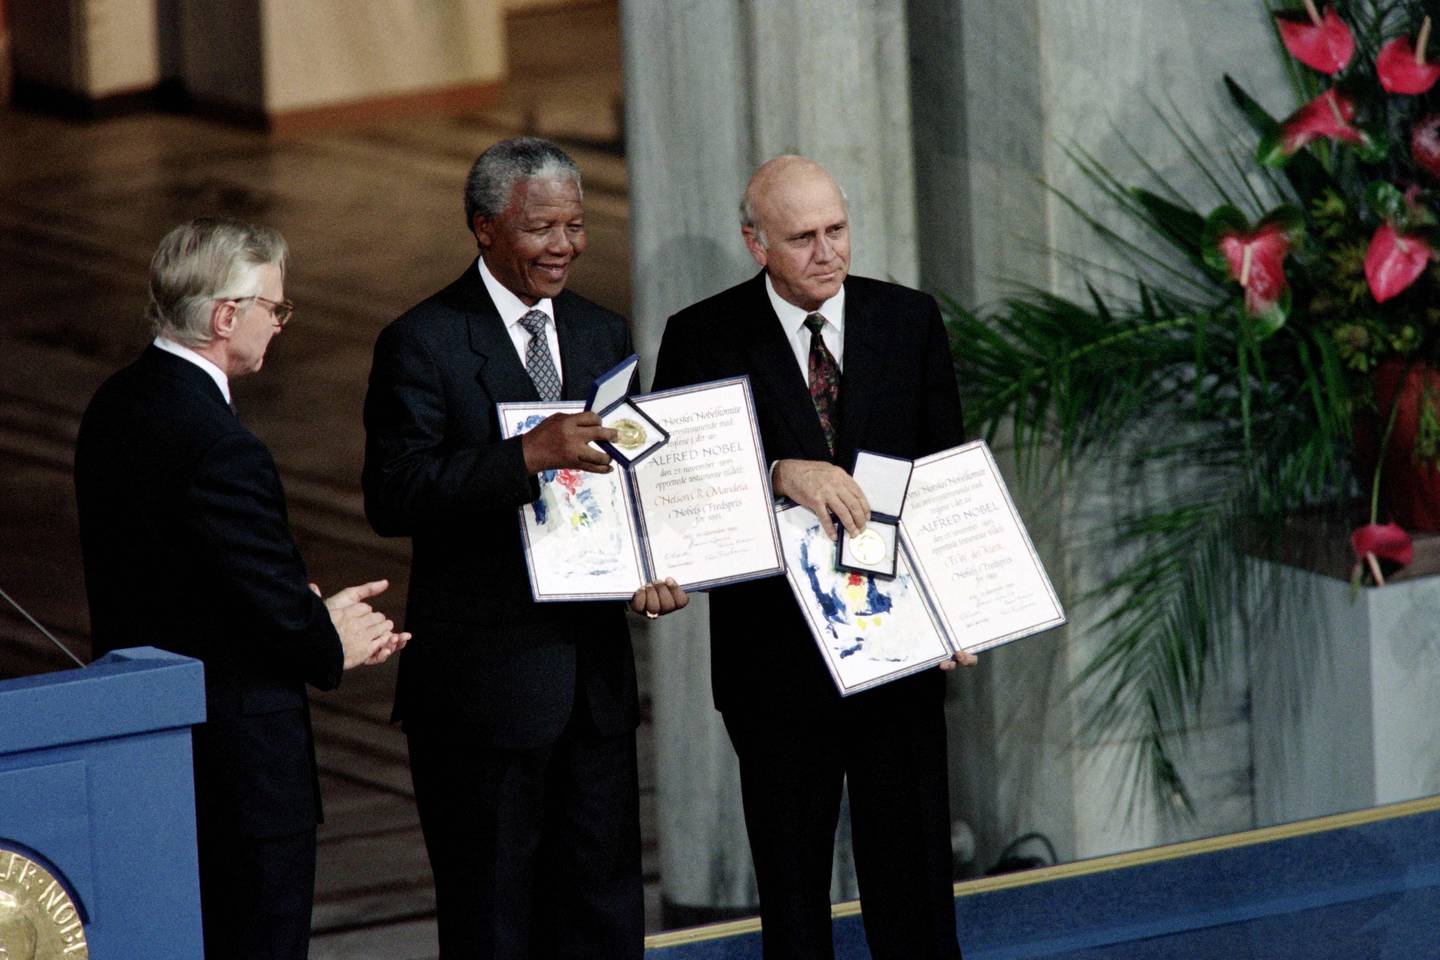 December 9, 1993 – Nelson Mandela, President of the African National Congress, and South African President Frederik de Klerk in Oslo after being awarded the Nobel Peace Prize for their work to end apartheid peacefully. AFP